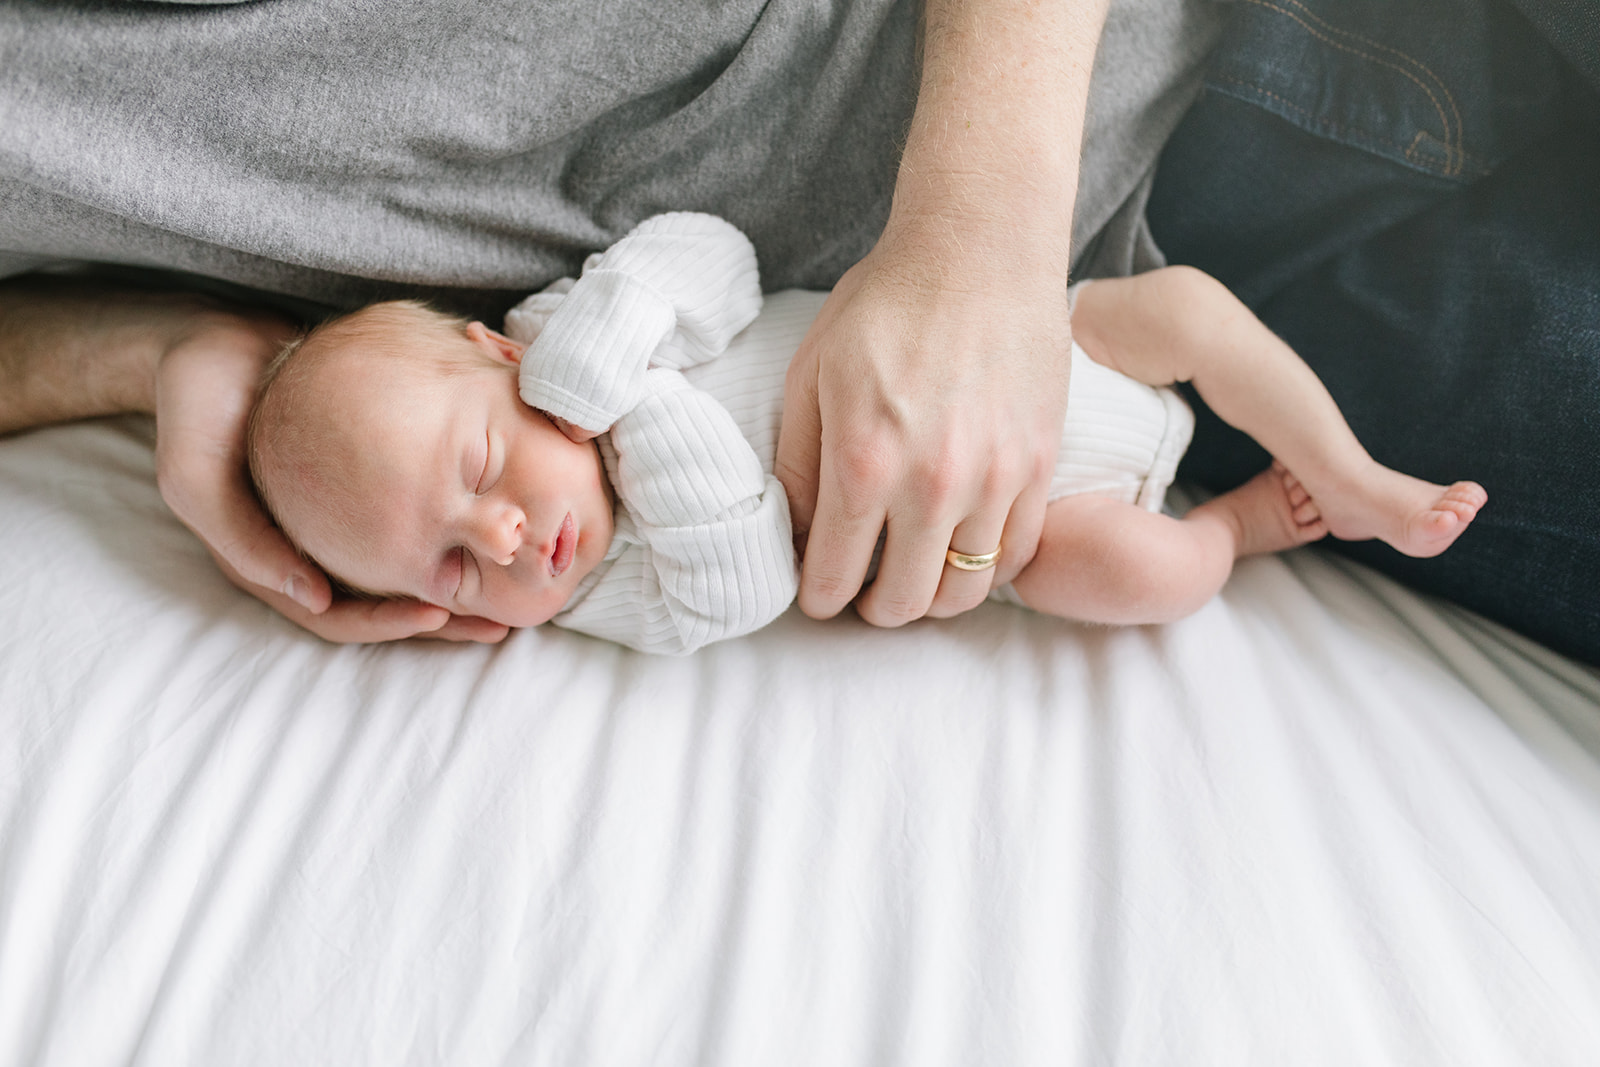 dad in grey shirt lays and cuddles his newborn child on a bed